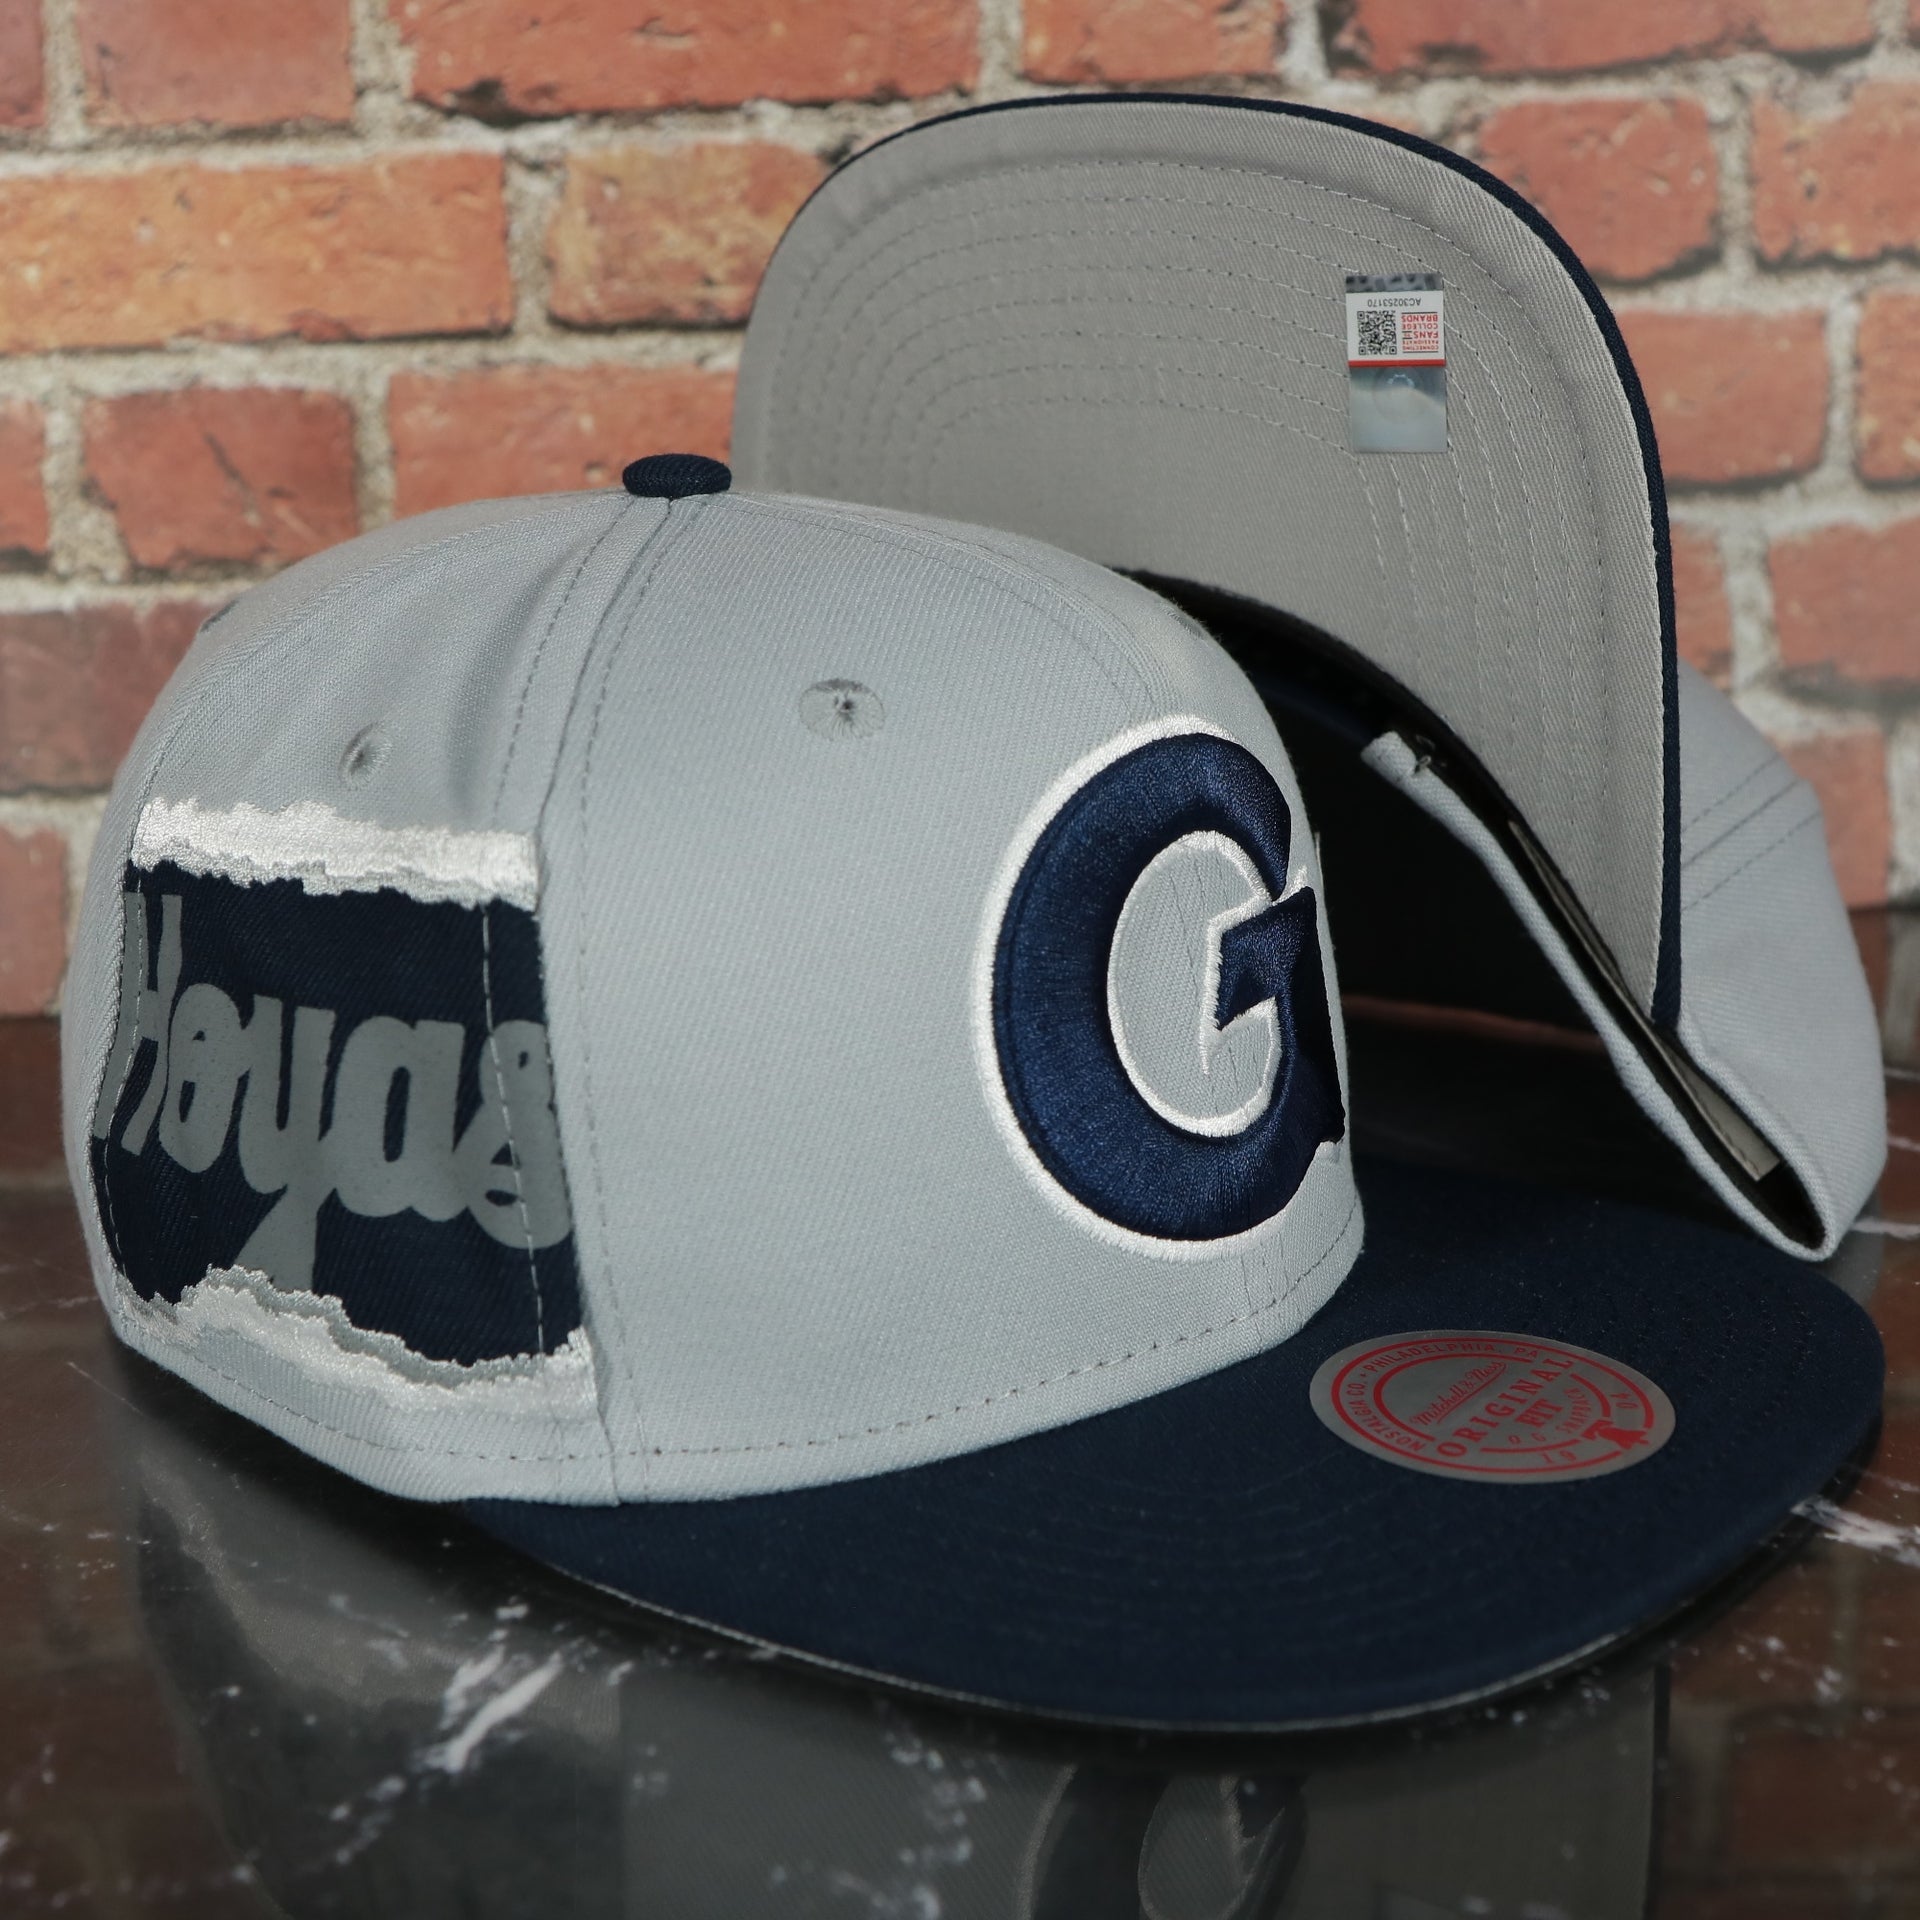 Georgetown Hoyas NCAA Jumbotron "Hoyas" Ripped Wordmark side patch Grey Bottom Grey/Navy Snapback hat | Mitchell and Ness Two Tone Snap Cap